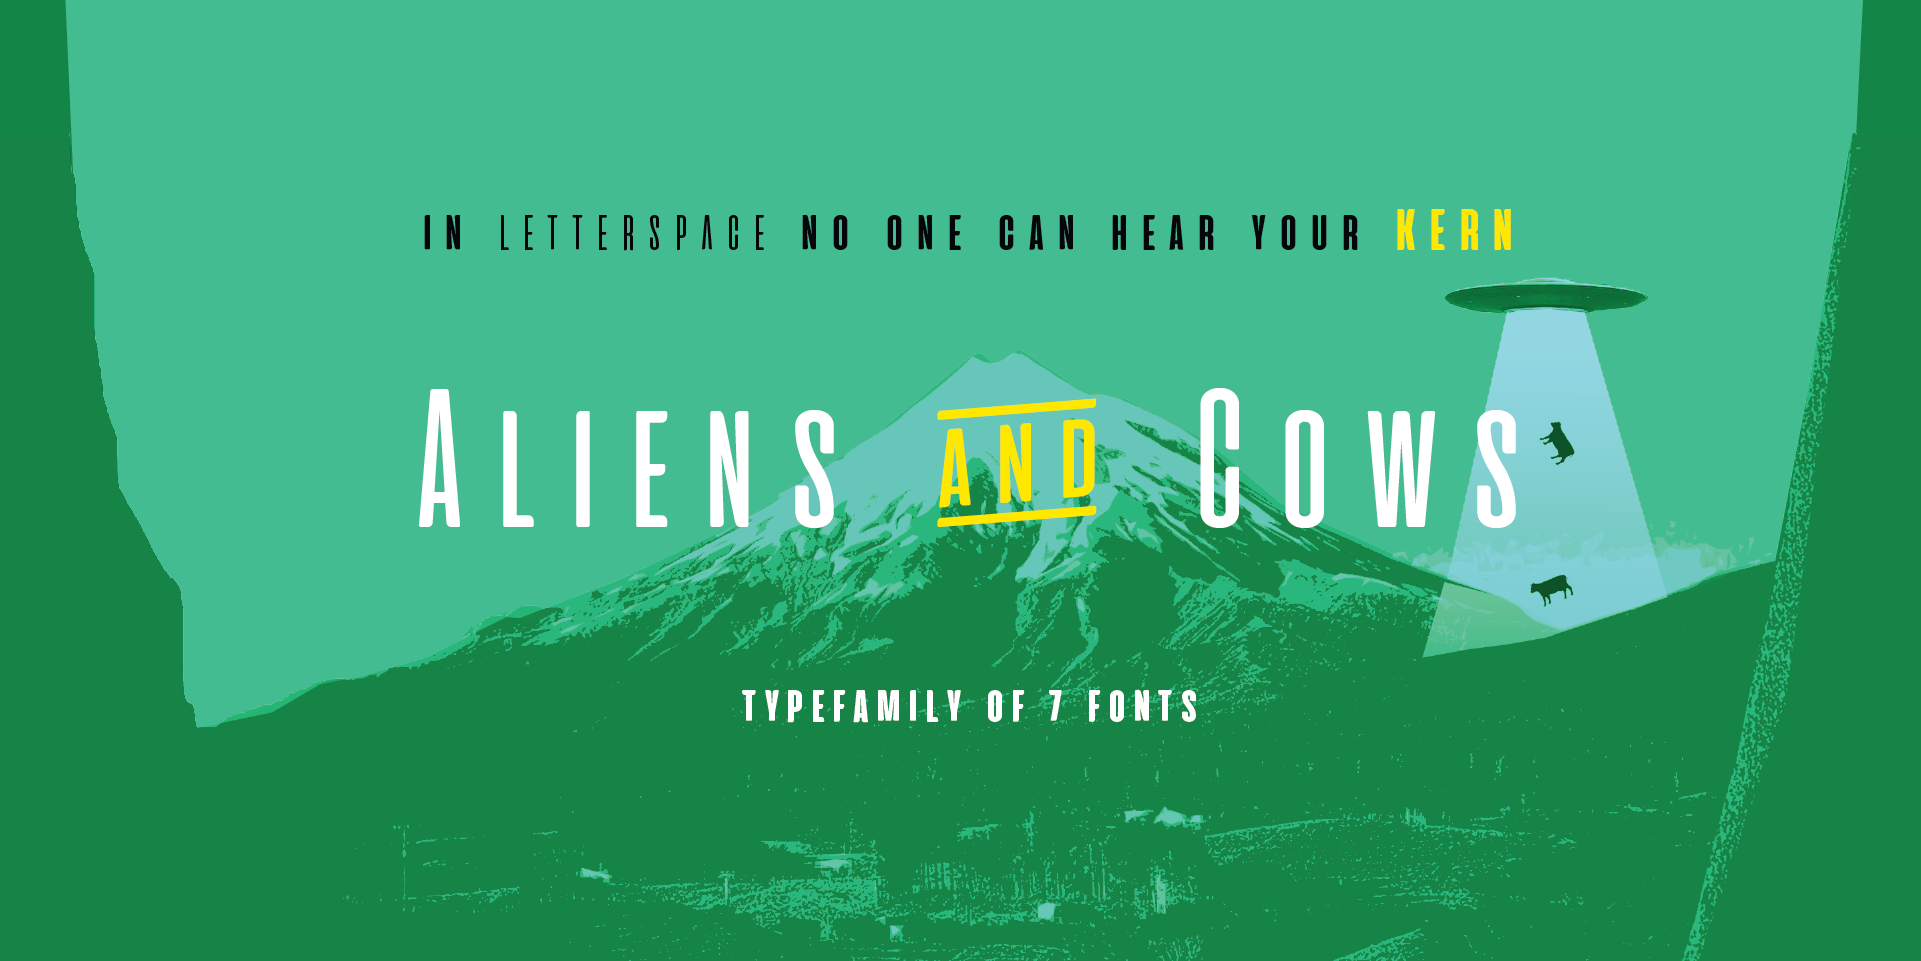 Example font Aliens and Cows #1